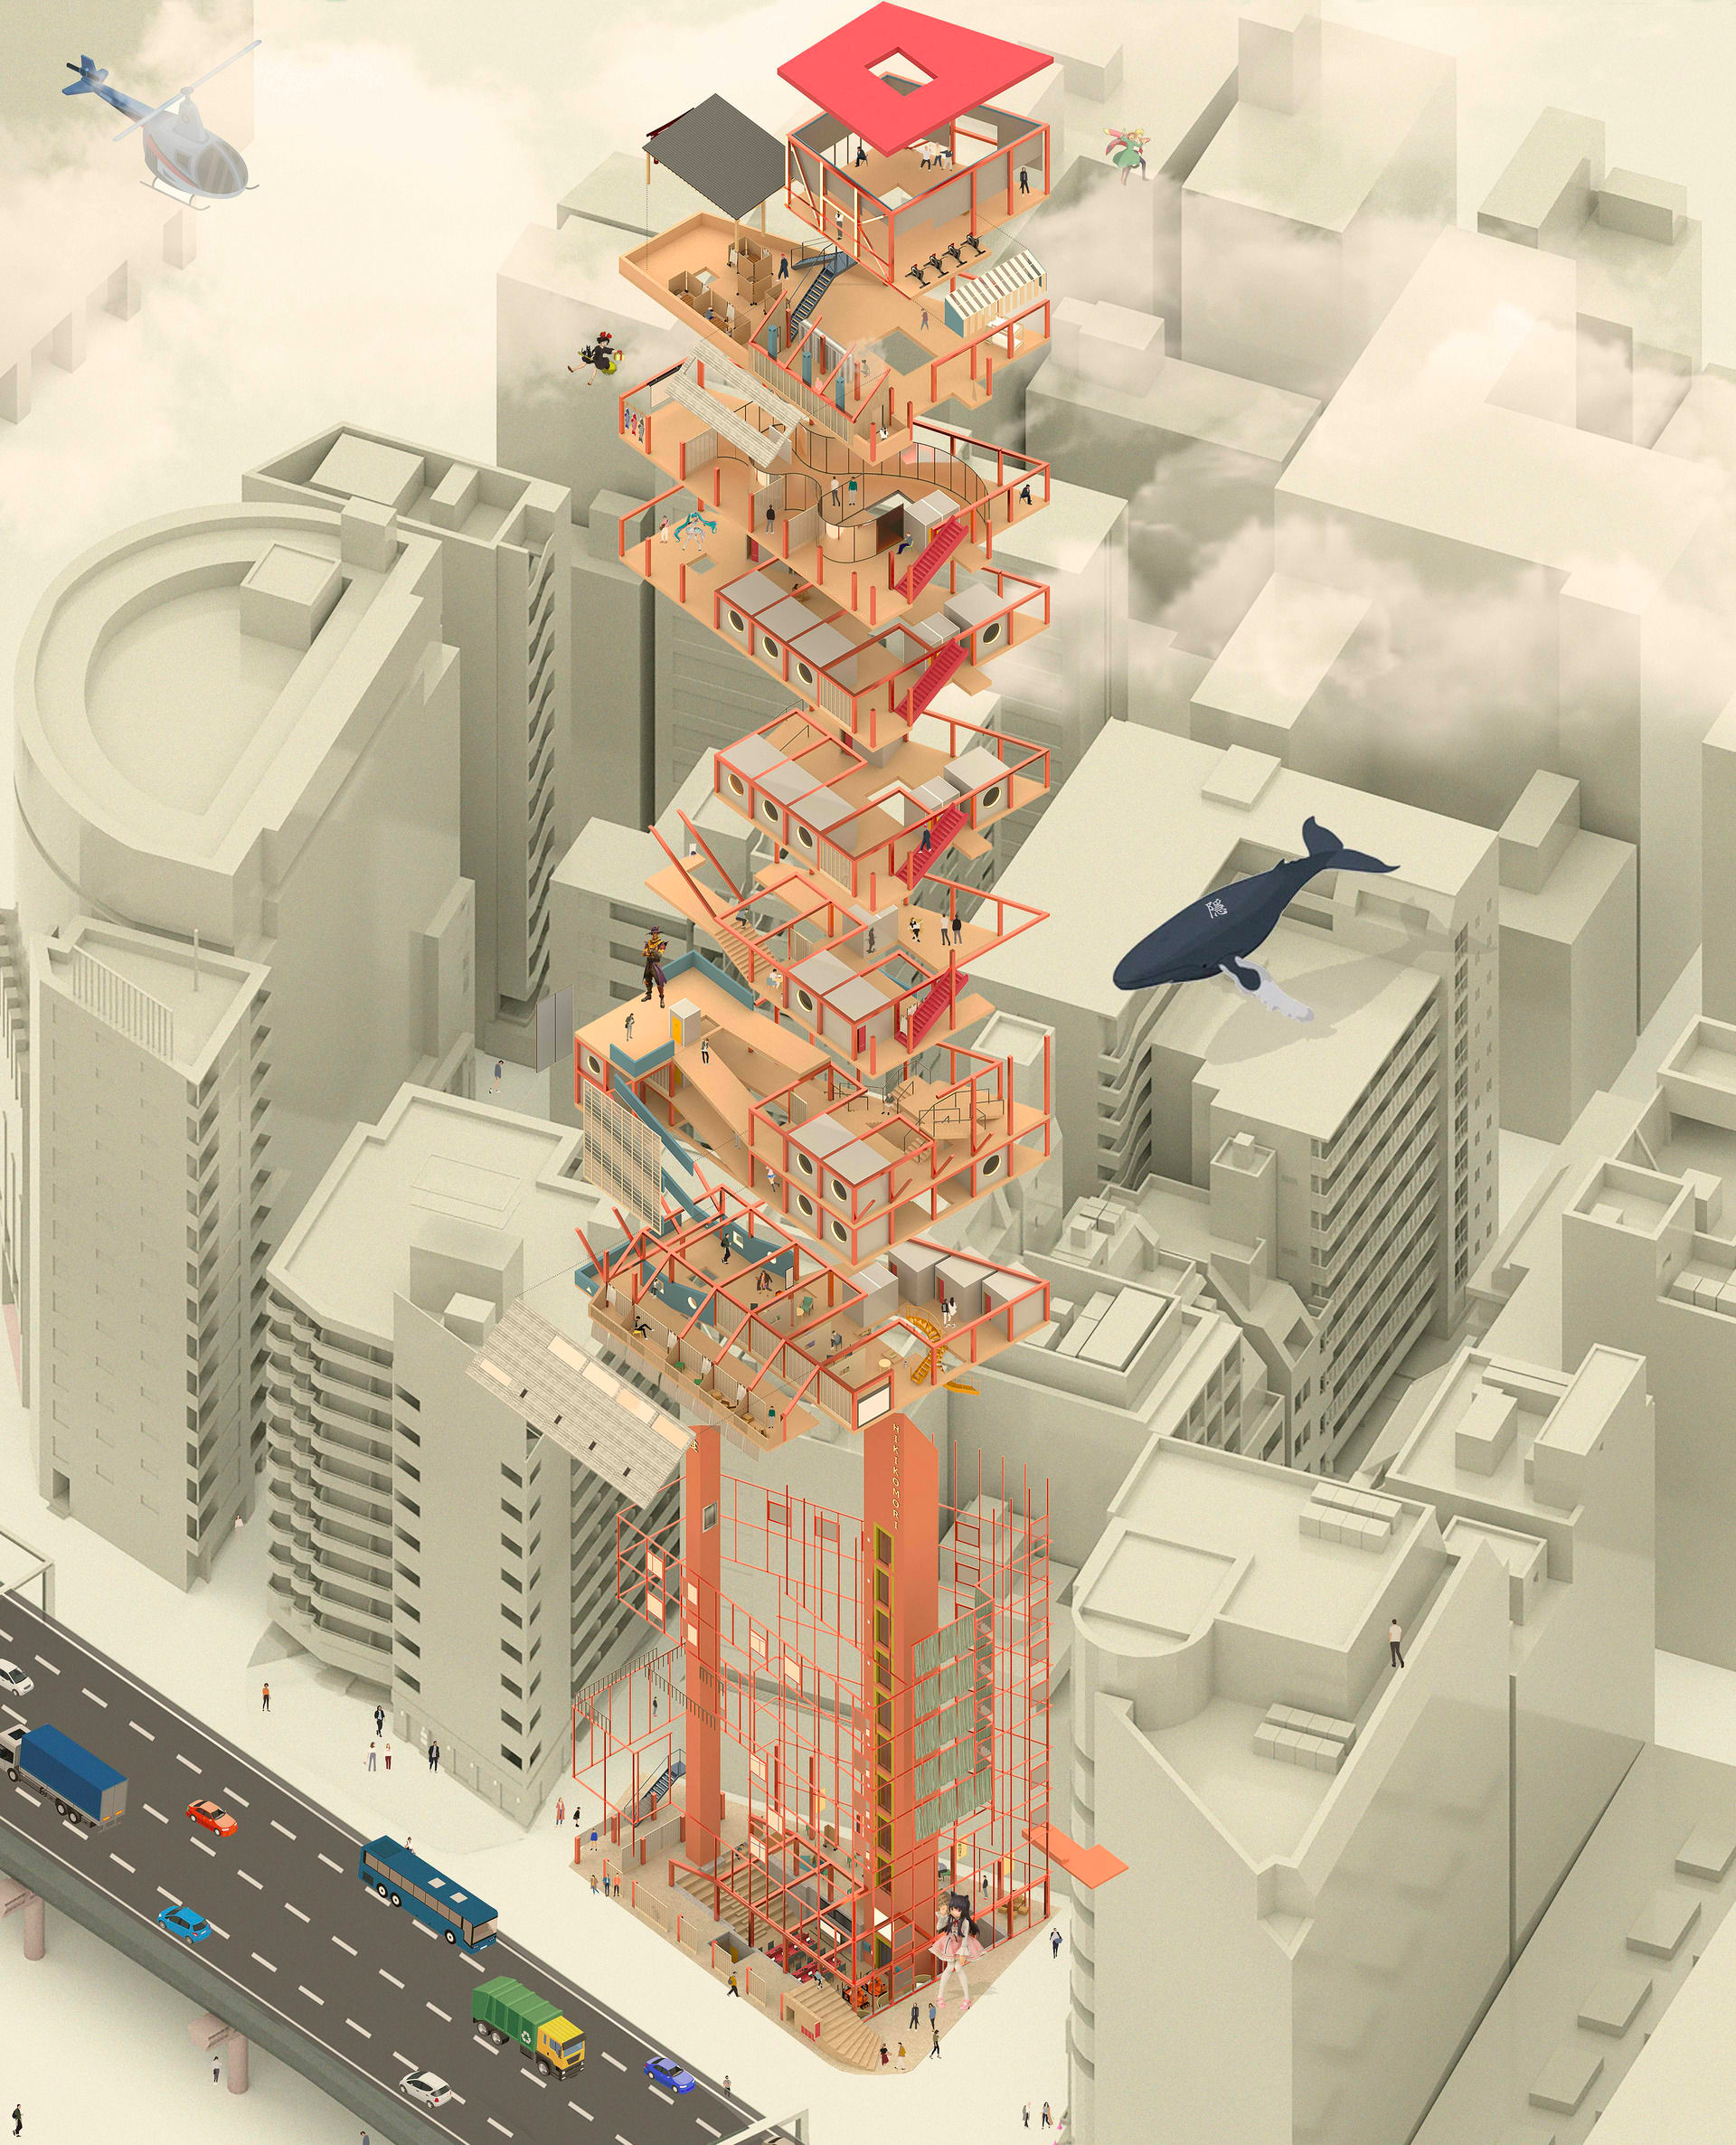 An aerial view of a computer-generated city street and high rise buildings, all in white, except one in orange and red, consisting of open plan floors with no roofs or walls. A whale swims above the buildings.